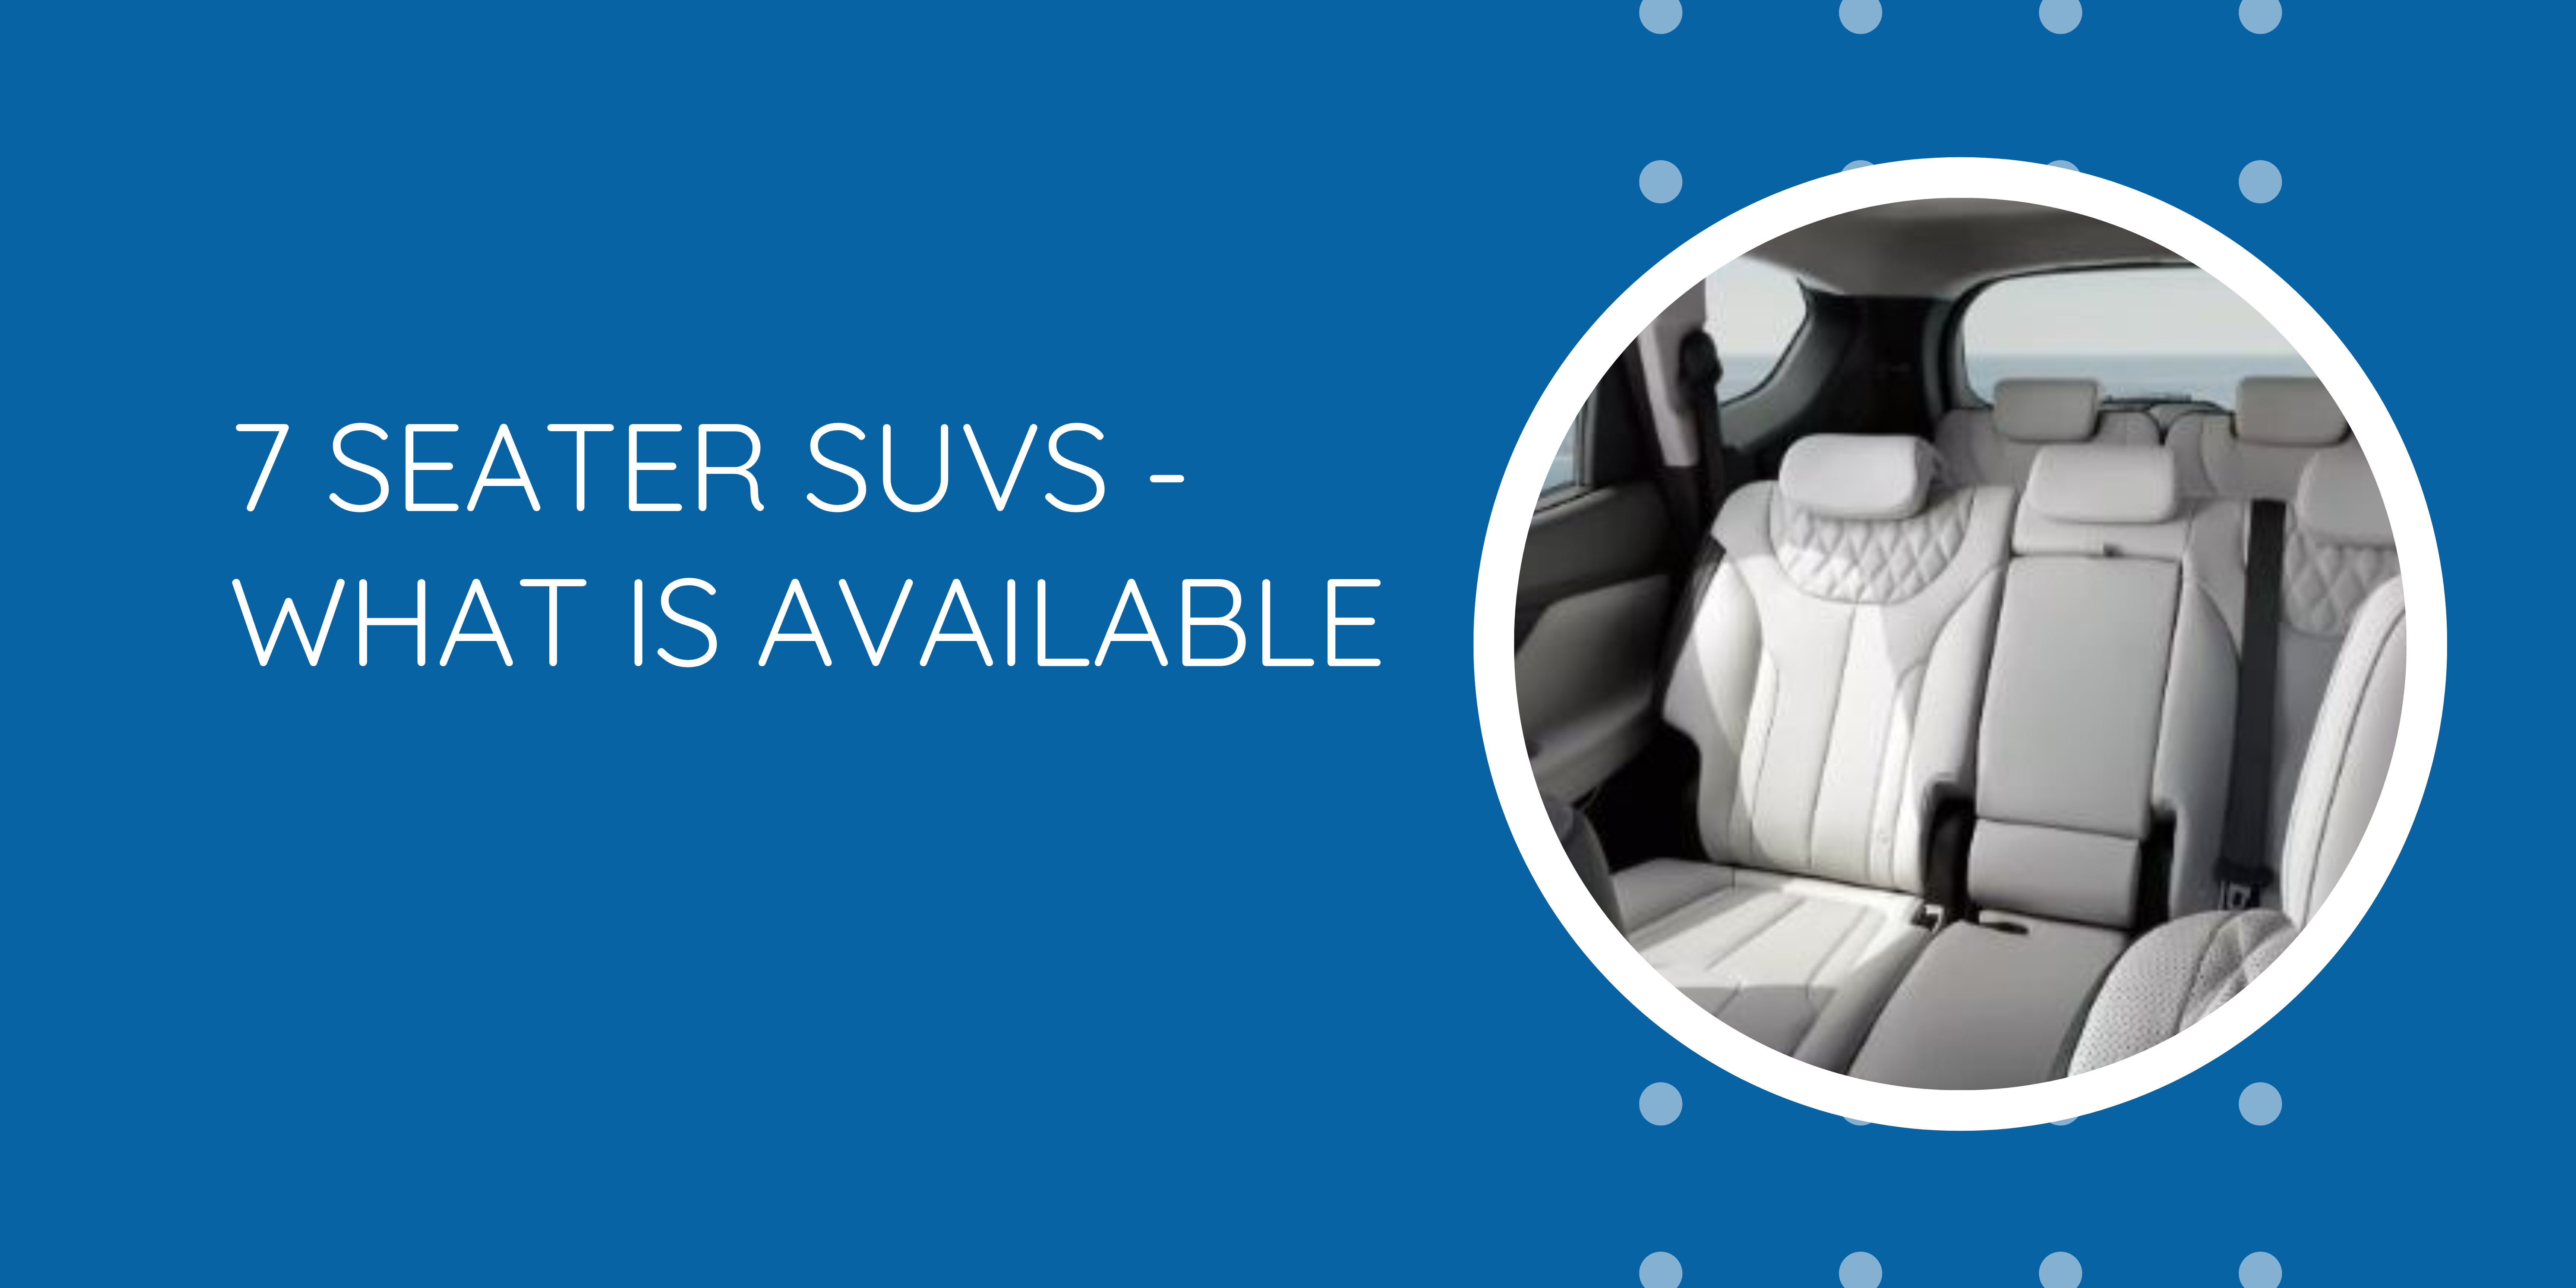 Used 7 Seaters - What is Available?